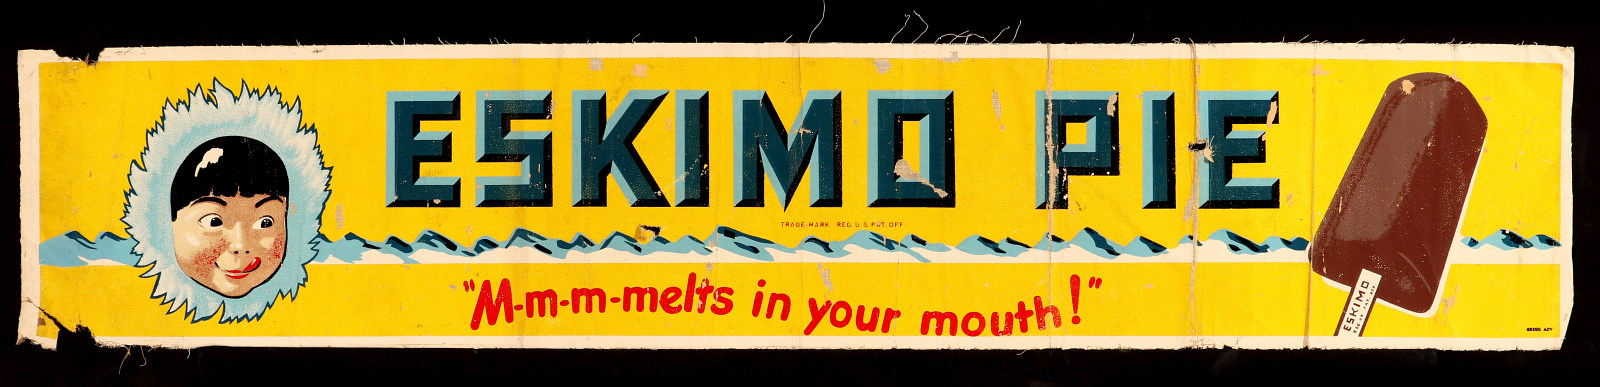 AN ESKIMO PIE PAINTED CANVAS ADVERTISING BANNER